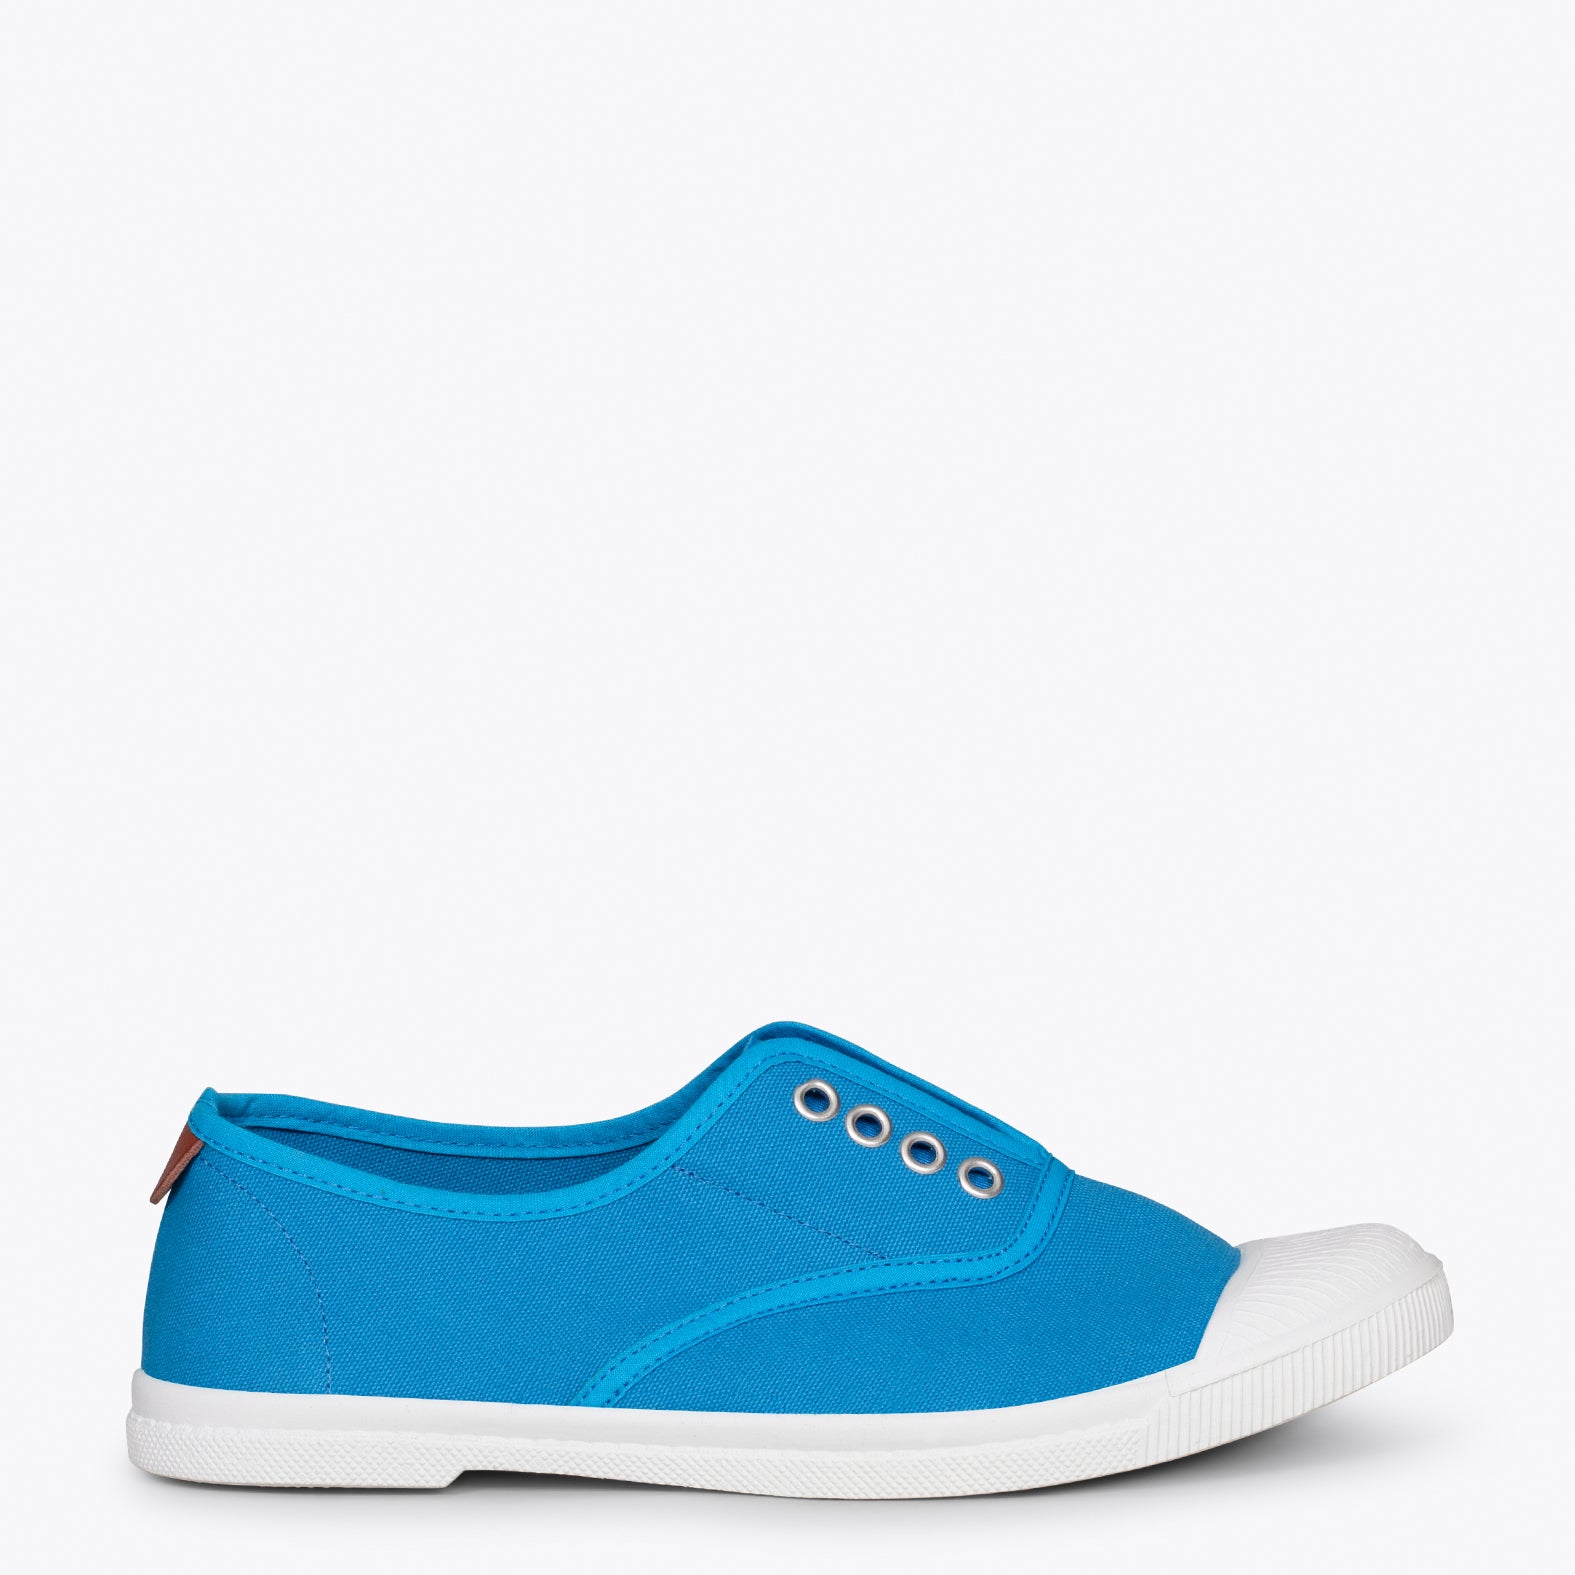 WAY – BLUE sneakers with elastic